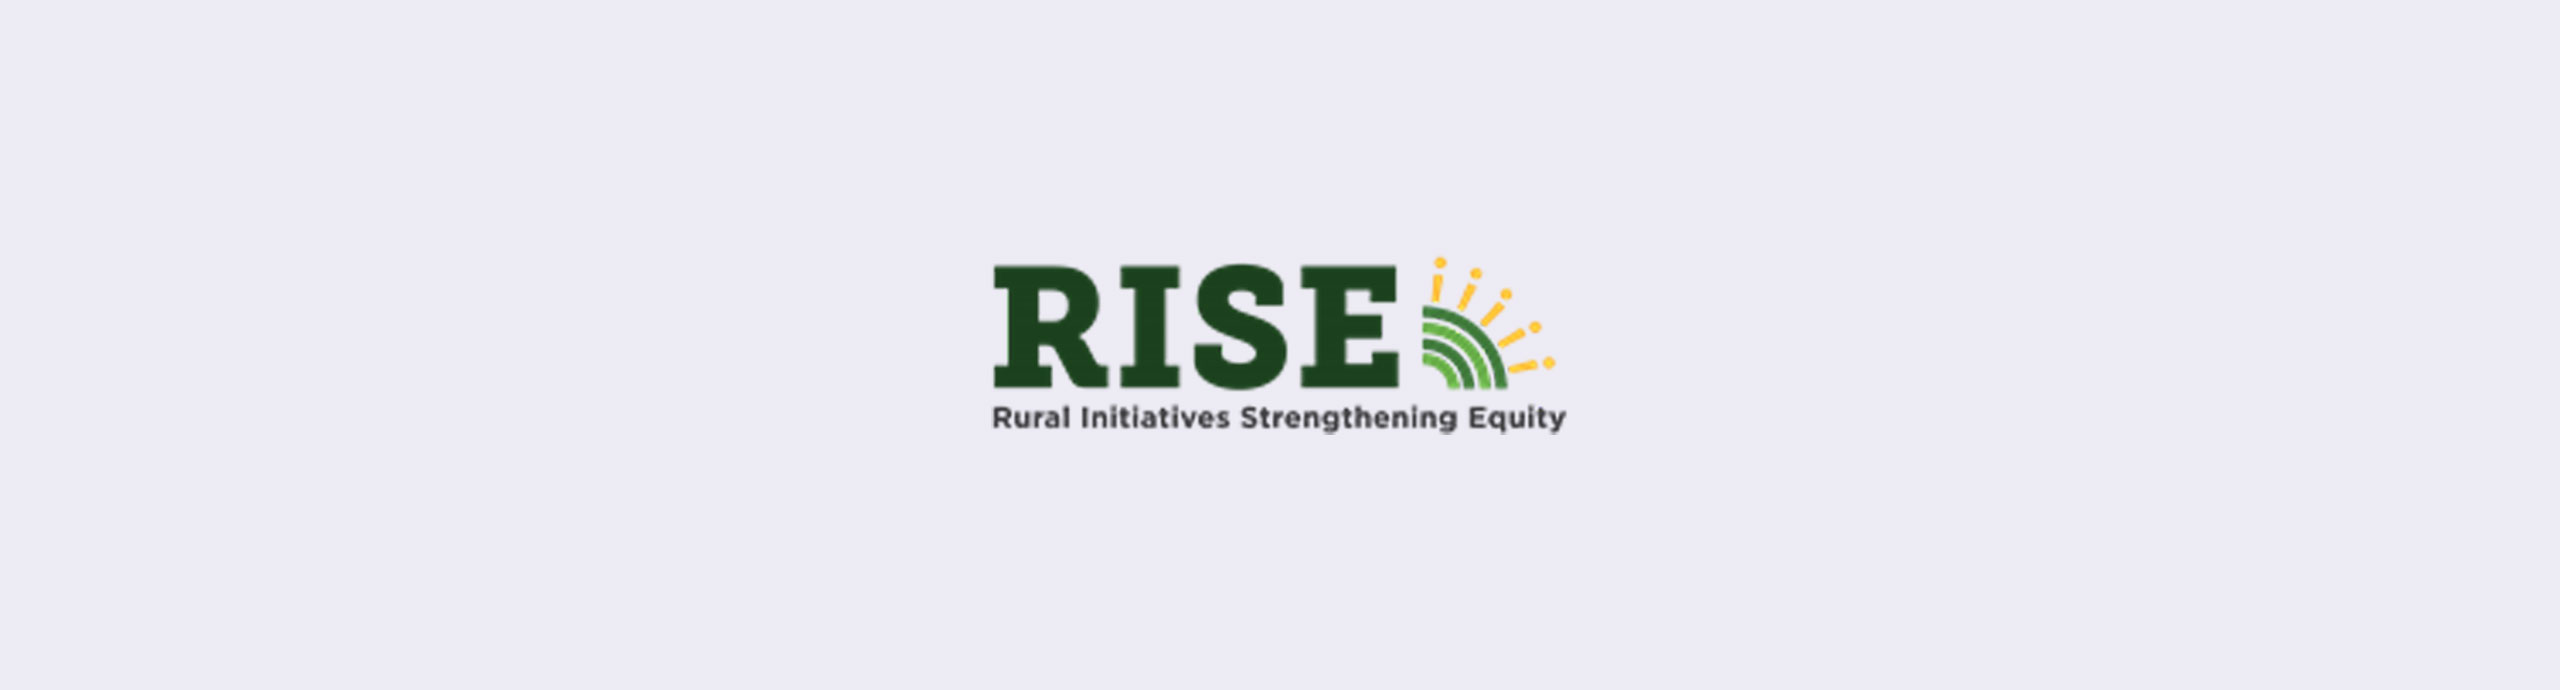 RISE: Rural initiatives strengthening equity